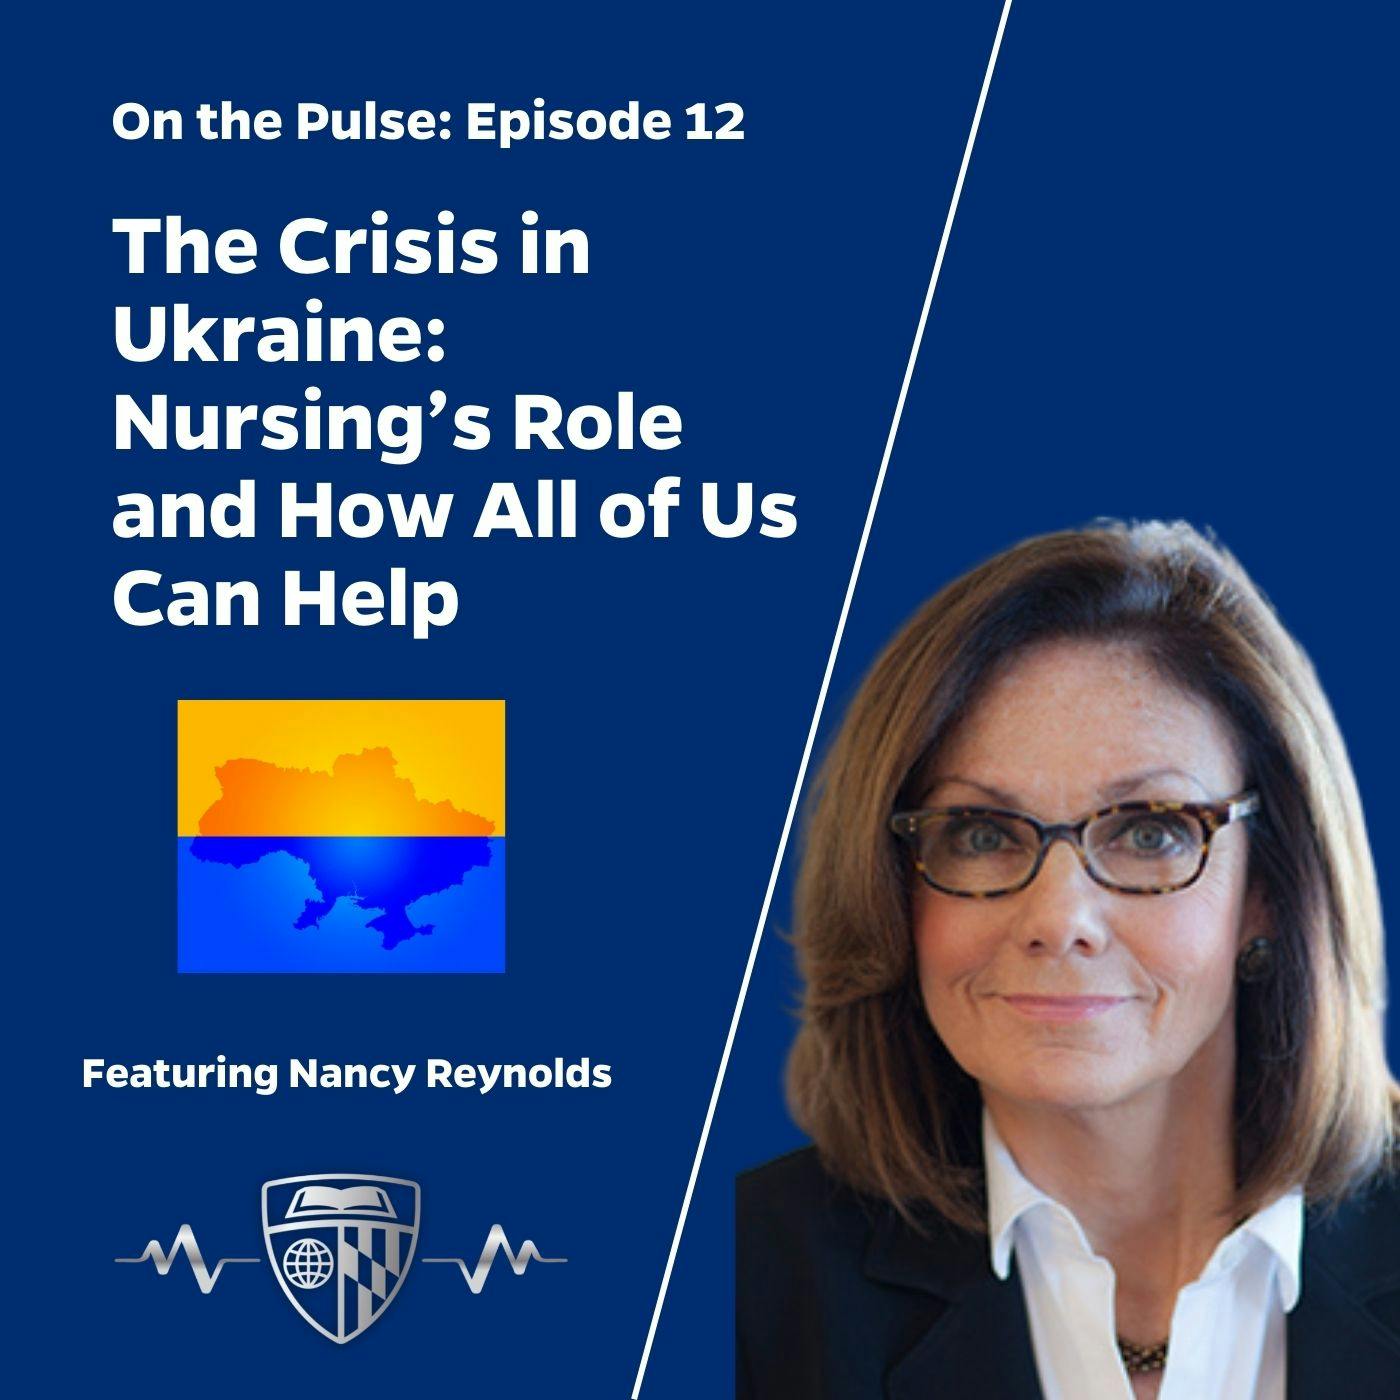 Episode 12: The Crisis in Ukraine: Nursing’s Role and How All of Us Can Help